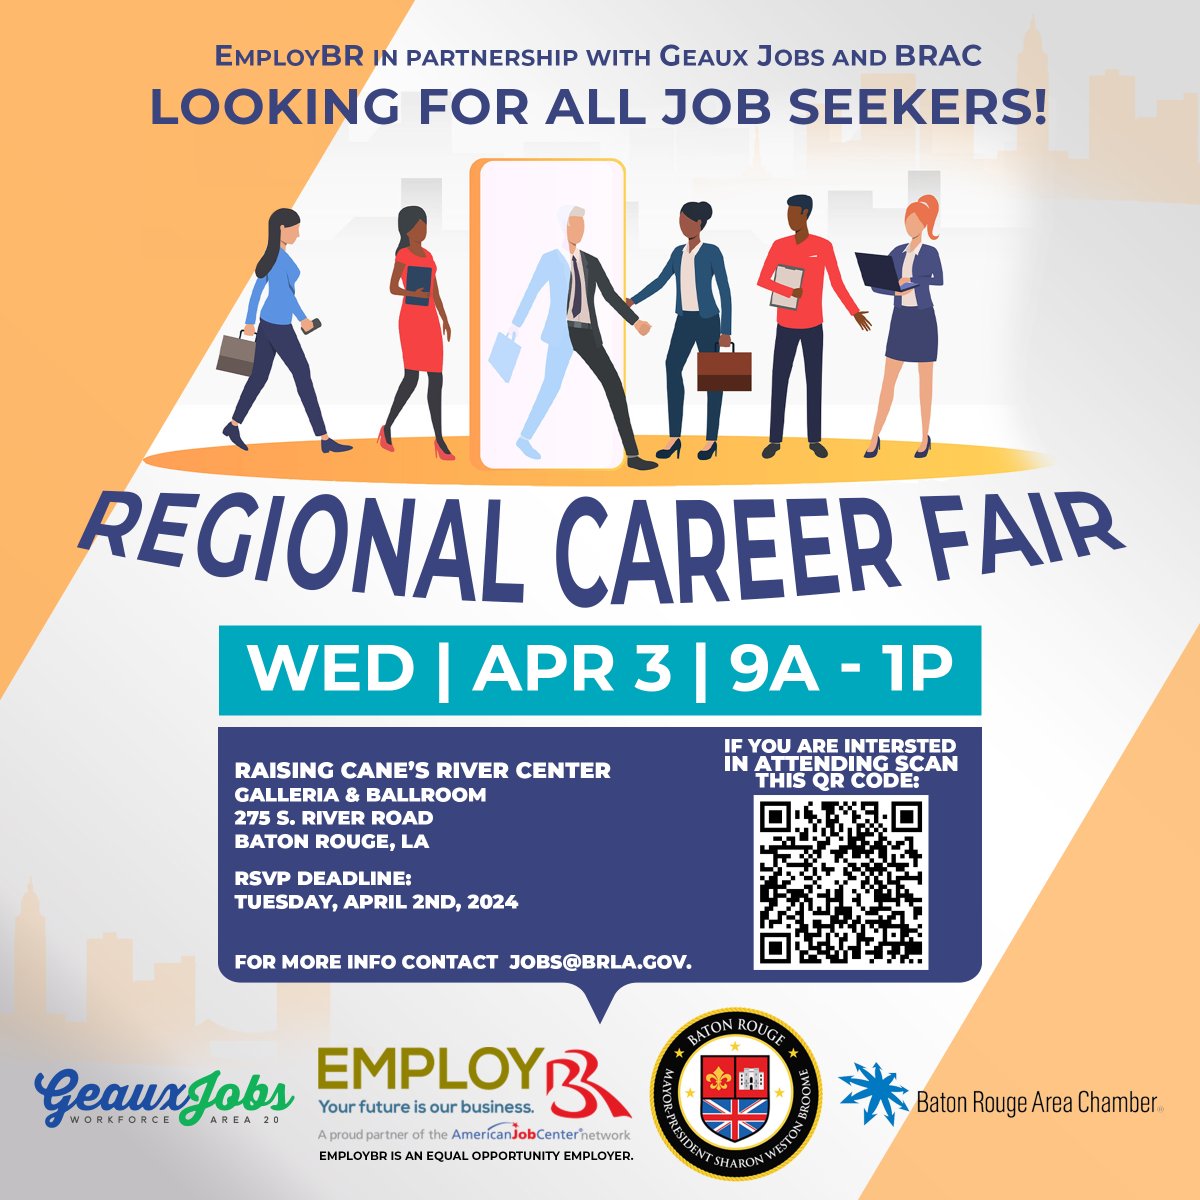 Looking for job opportunities? Join us on Tomorrow, Wednesday, April 3 from 9 AM to 1 PM at the Raising Cane's River Center. Open to all job seekers! For more information, contact jobs@brla.gov. Don't miss this chance to explore exciting career prospects!